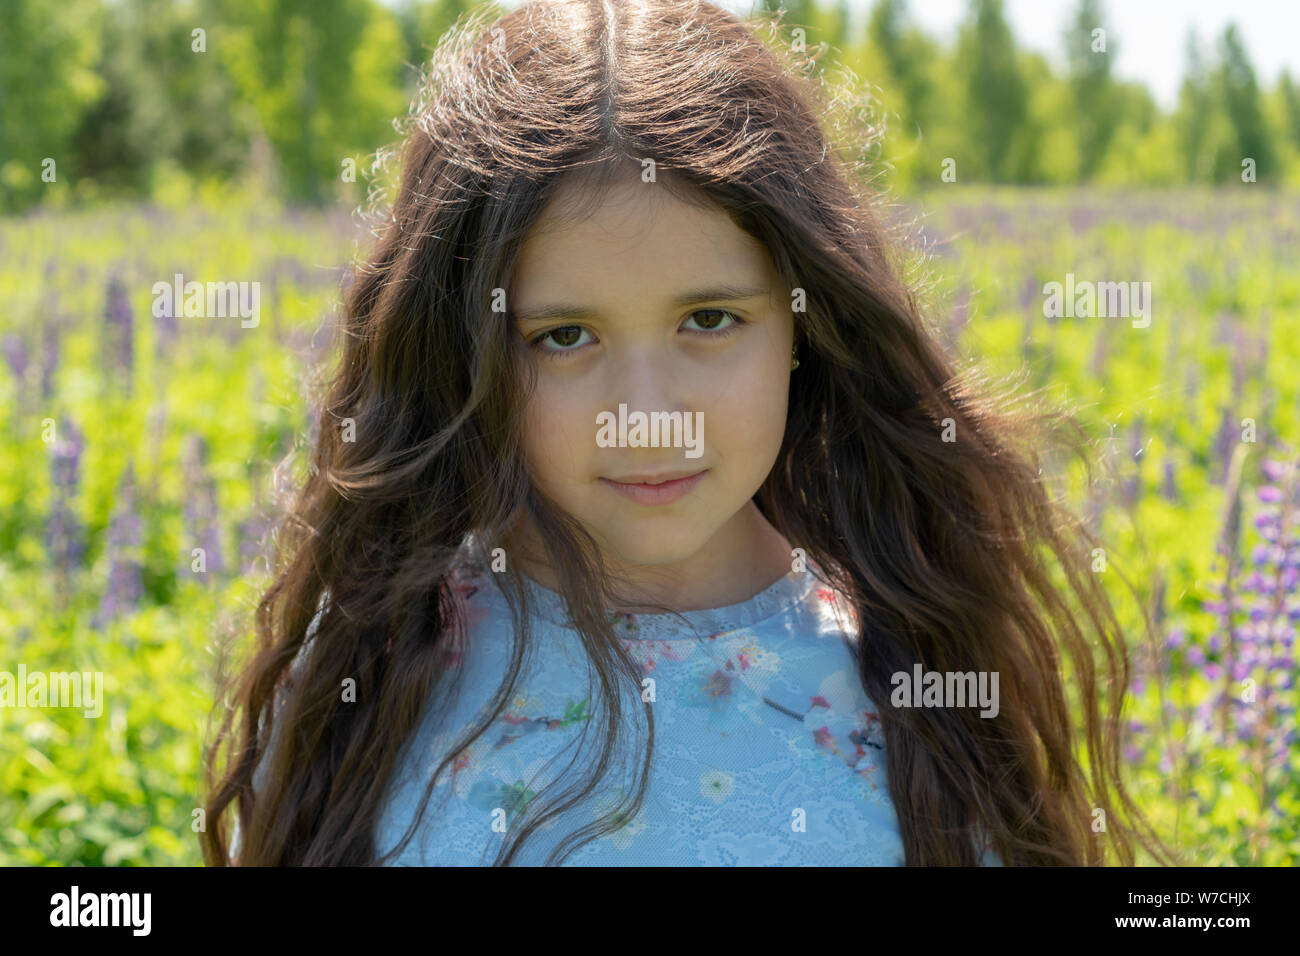 Portrait of a beautiful teenager girl with brown eyes and long, curly hair  on a field of flowers Stock Photo - Alamy